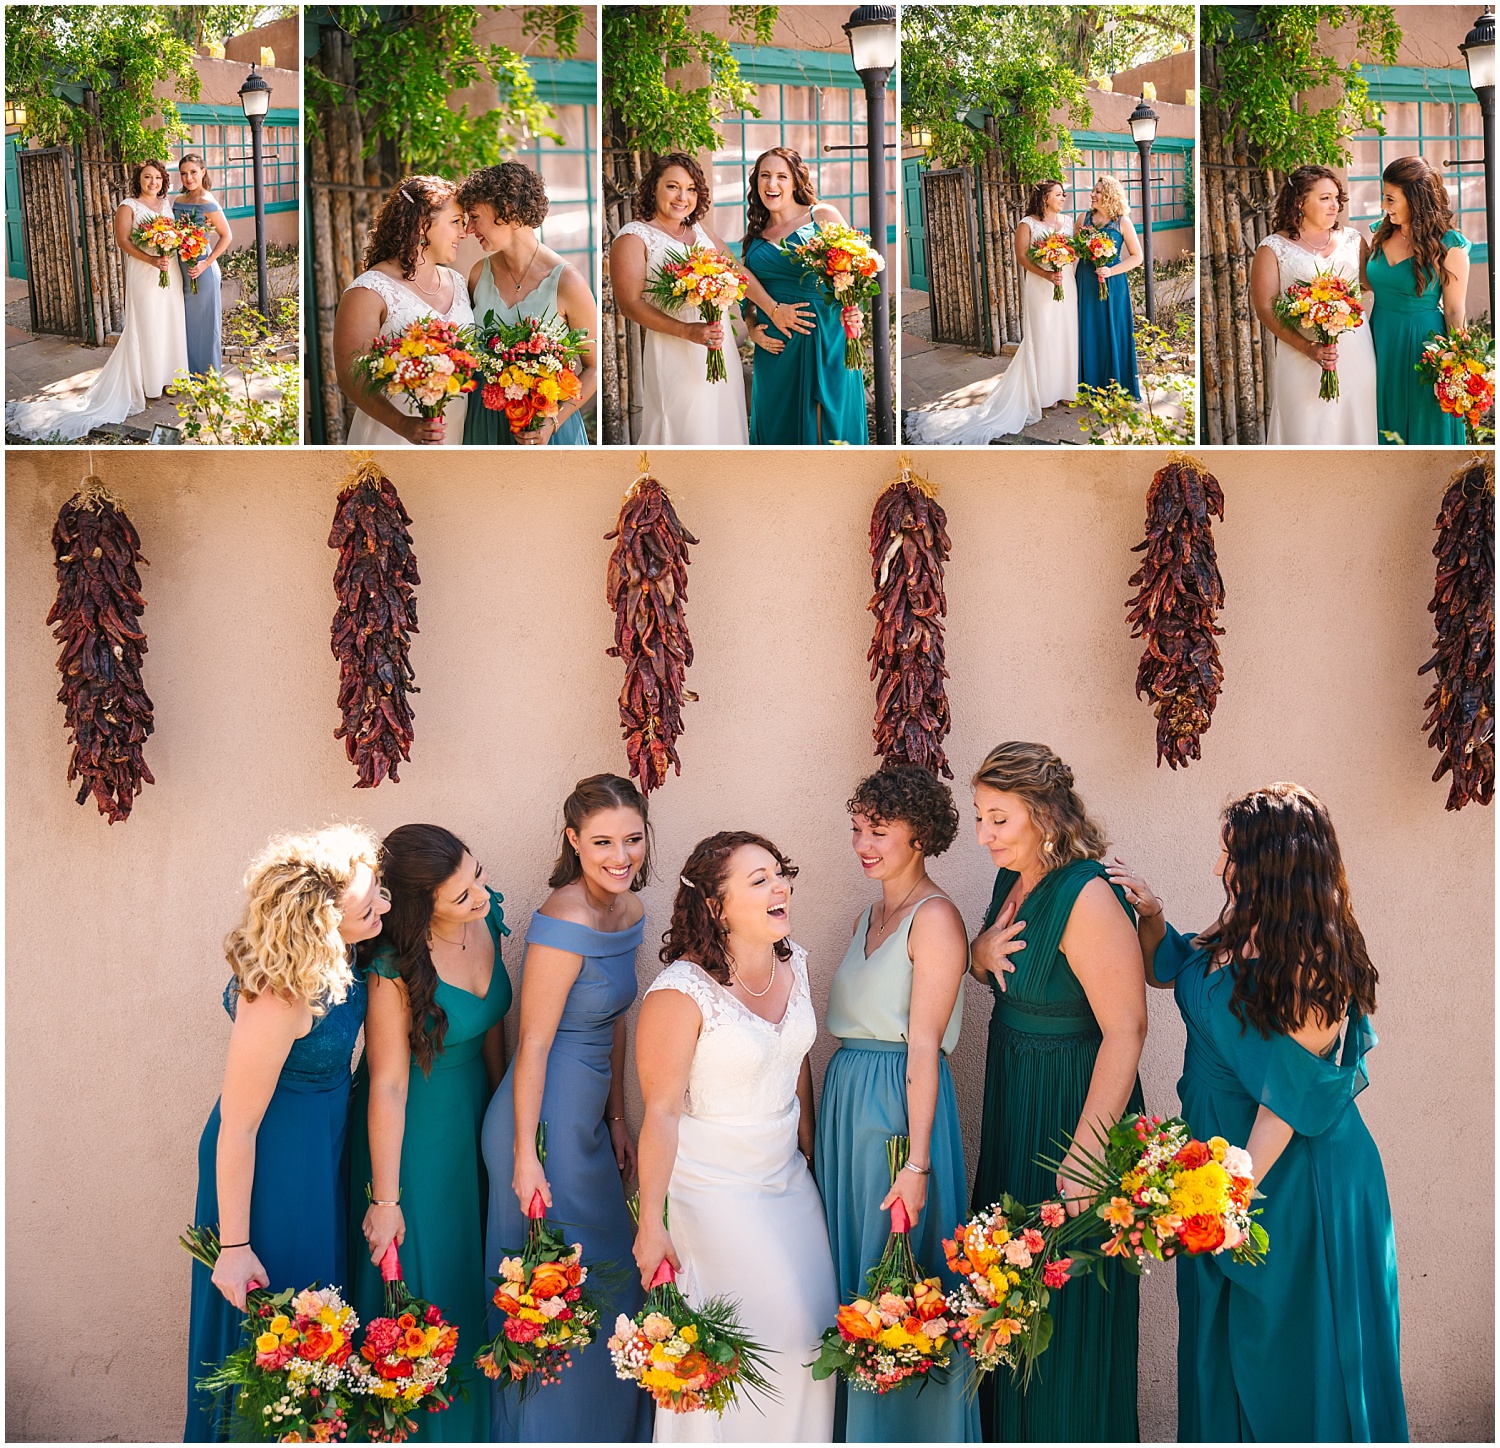 Mismatched bridesmaid style for Santa Fe wedding: turquoise dresses with bright bouquets